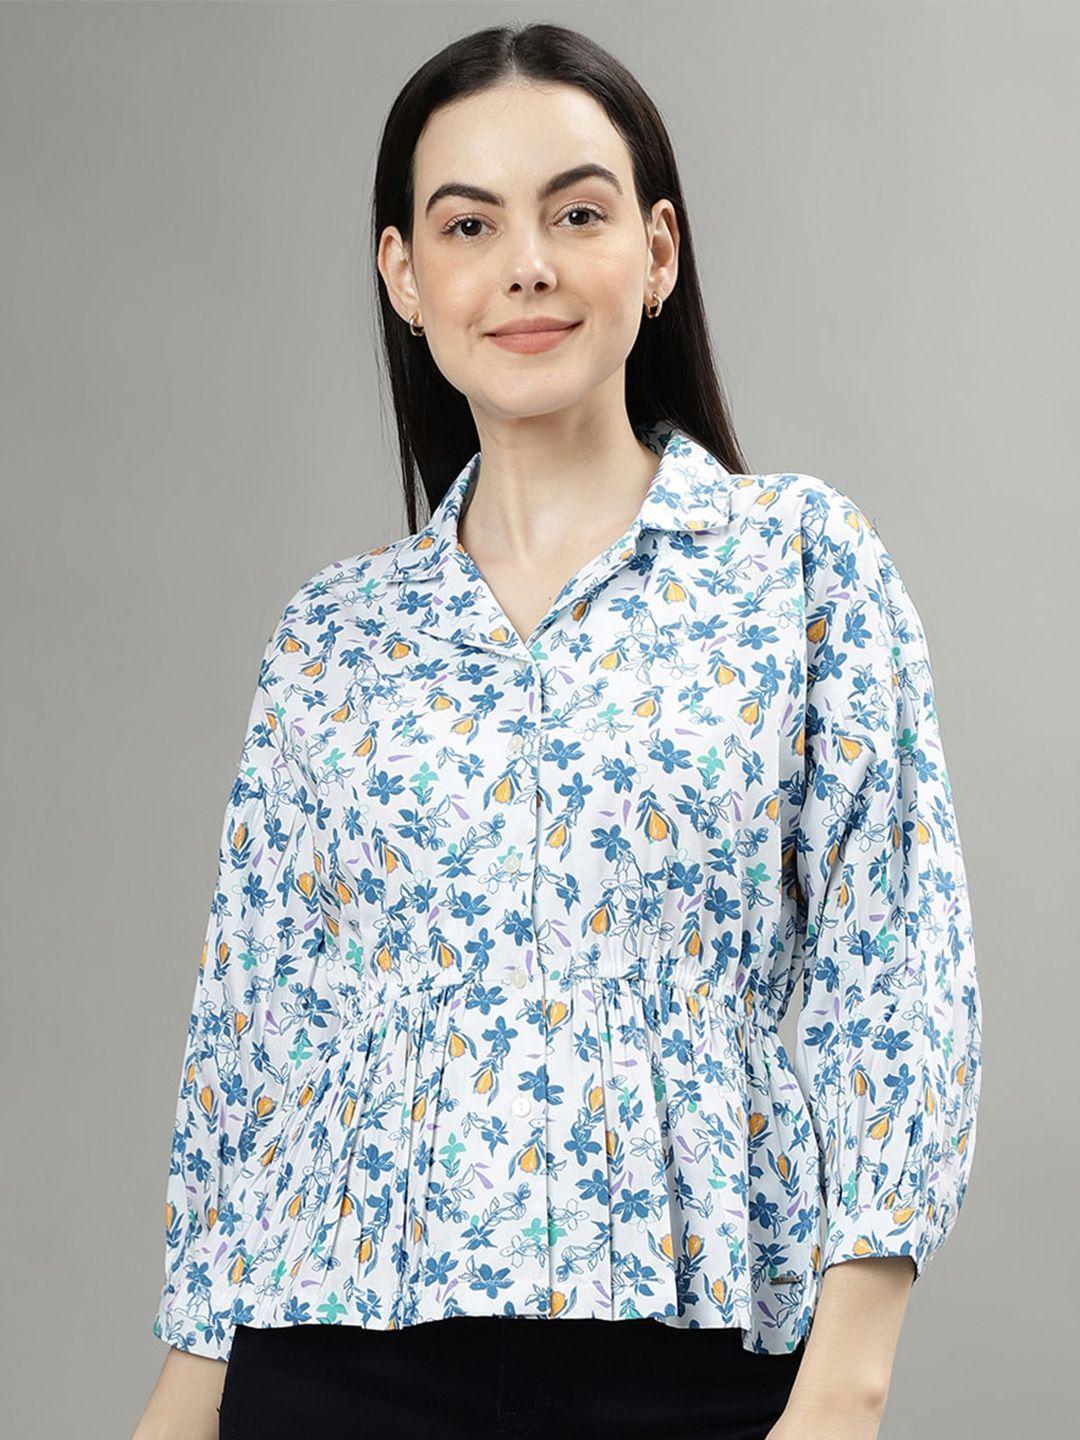 elle-floral-printed-spread-collar-three-quarter-sleeves-pleated-casual-shirt